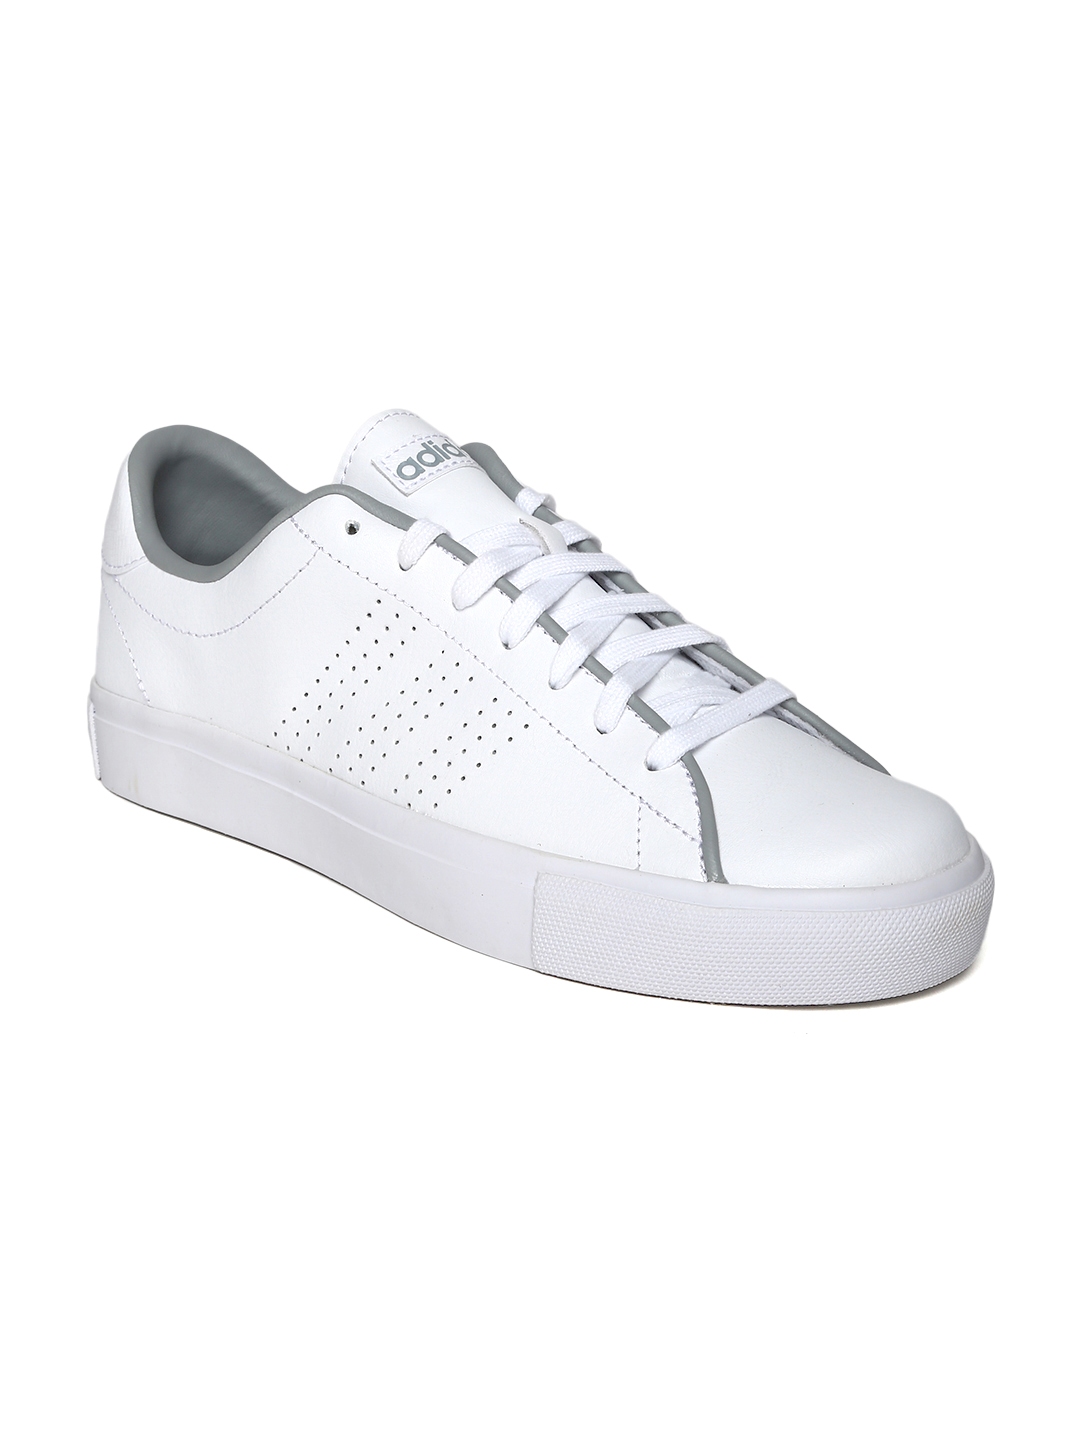 Buy ADIDAS NEO Men White Daily Line Leather Casual - Casual for Men 655762 | Myntra